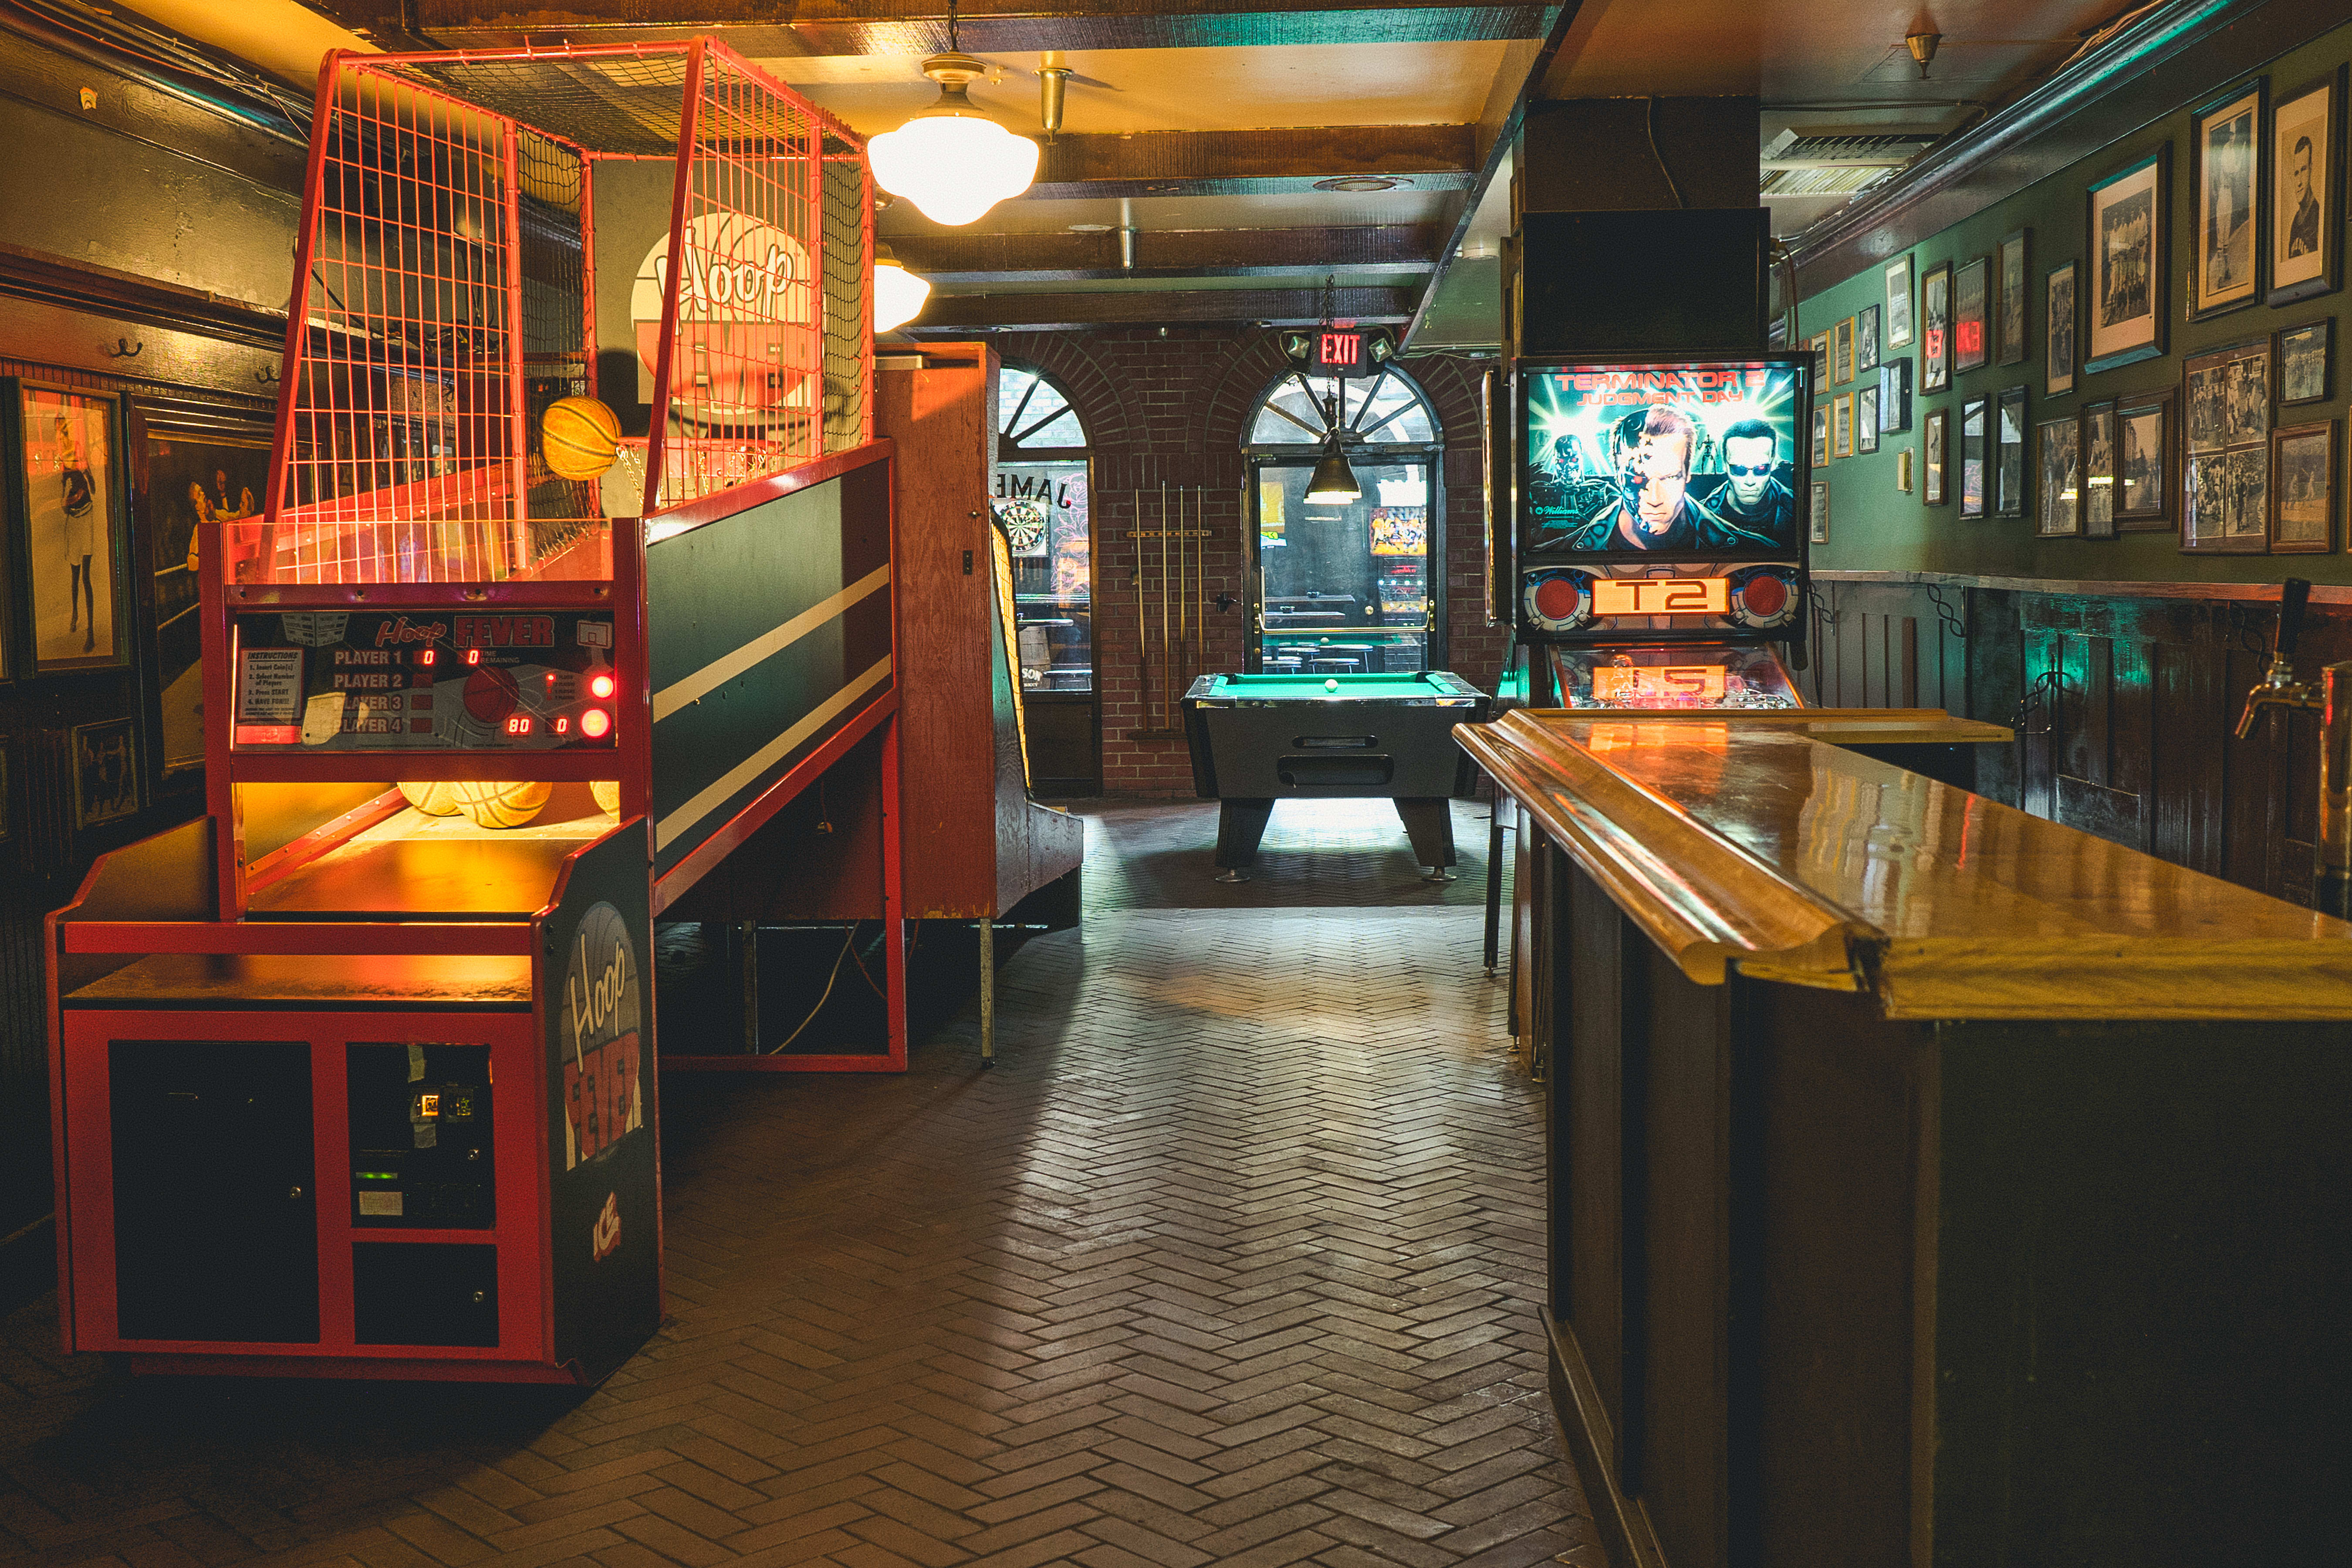 The Best Sports Bars In LA - Los Angeles - The Infatuation